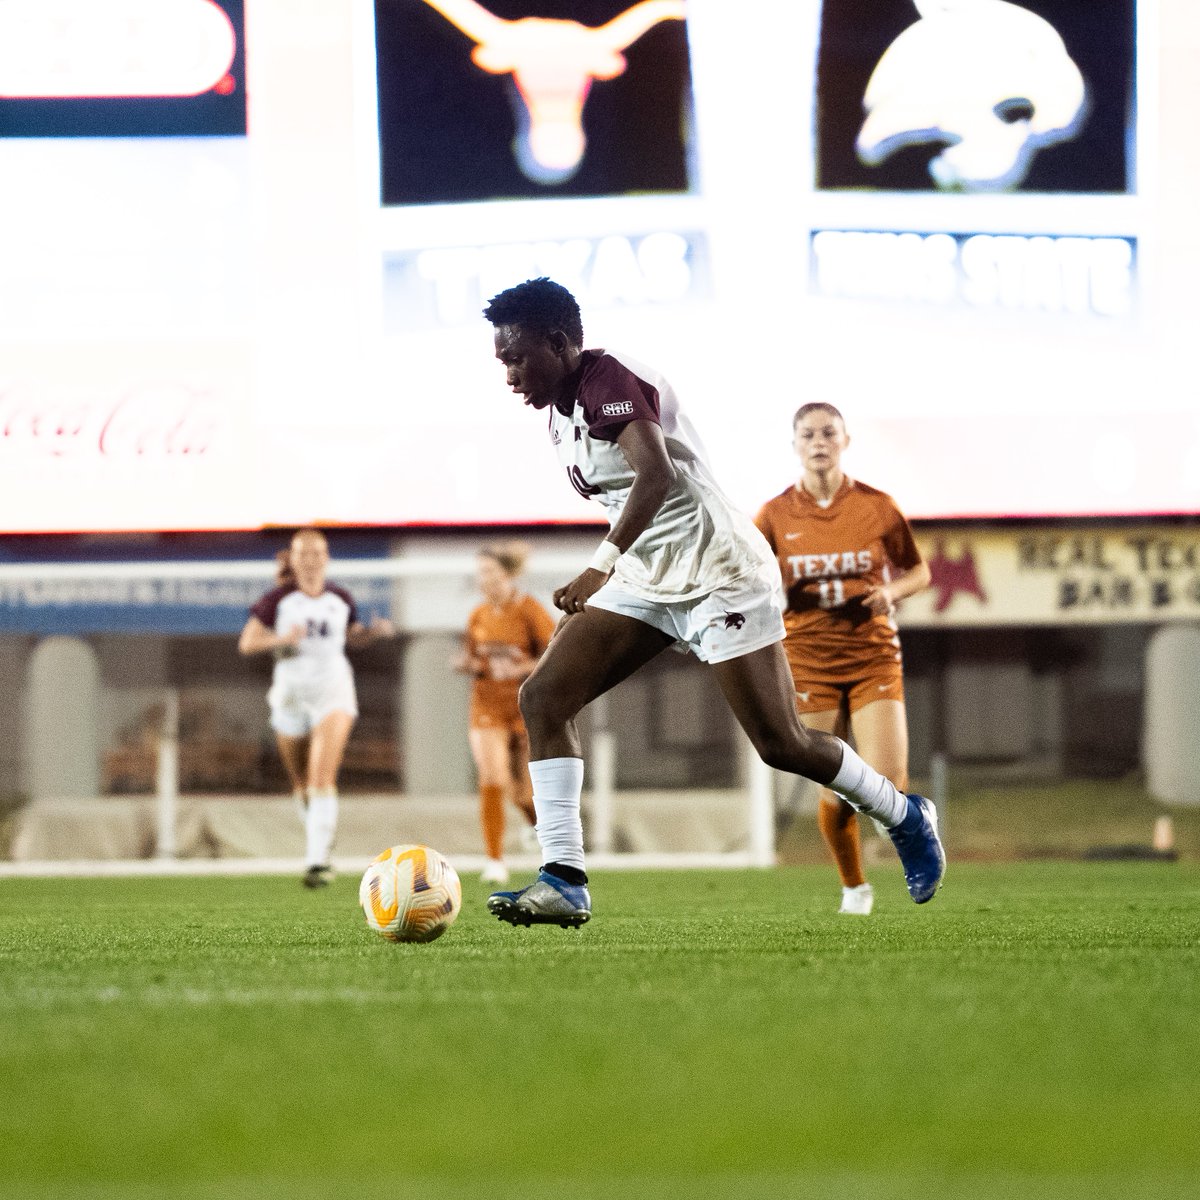 Back in action tonight as we take on Abilene Christian at 6 p.m. at the Bobcat Soccer Complex! #EatEmUp